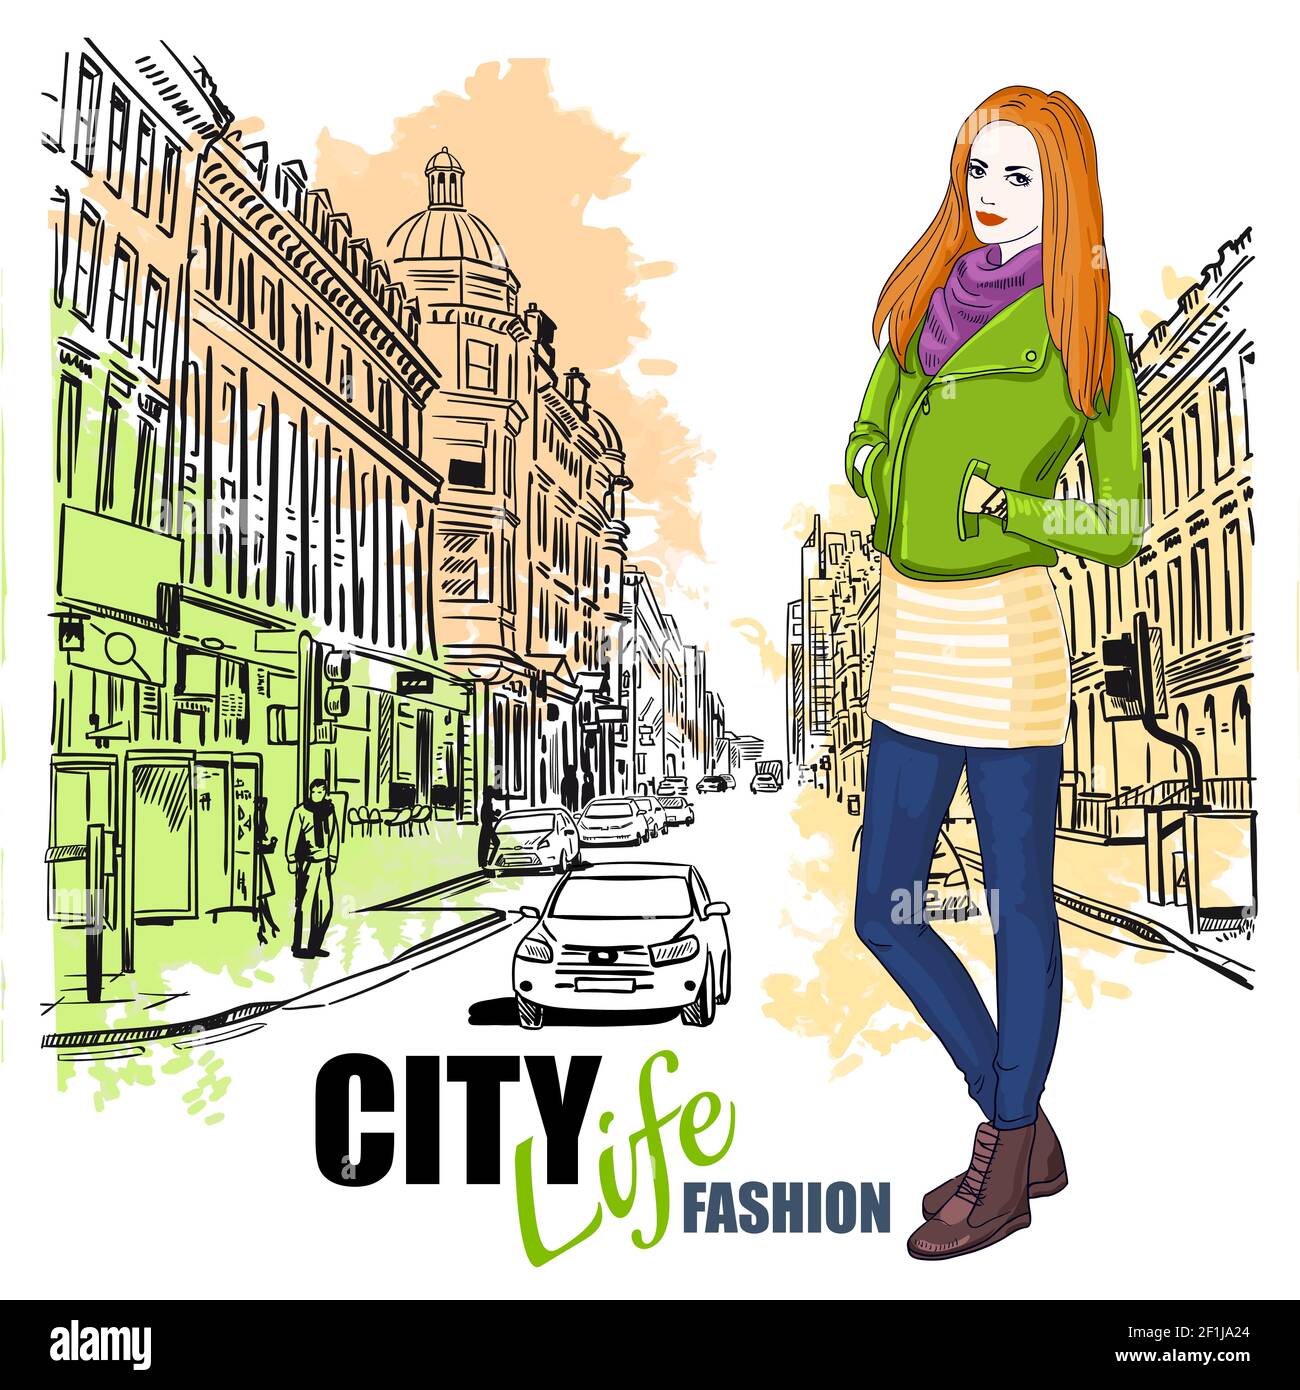 Colored sketch fashion city street poster with girl in town and pencil style drawn vector illustration Stock Vector